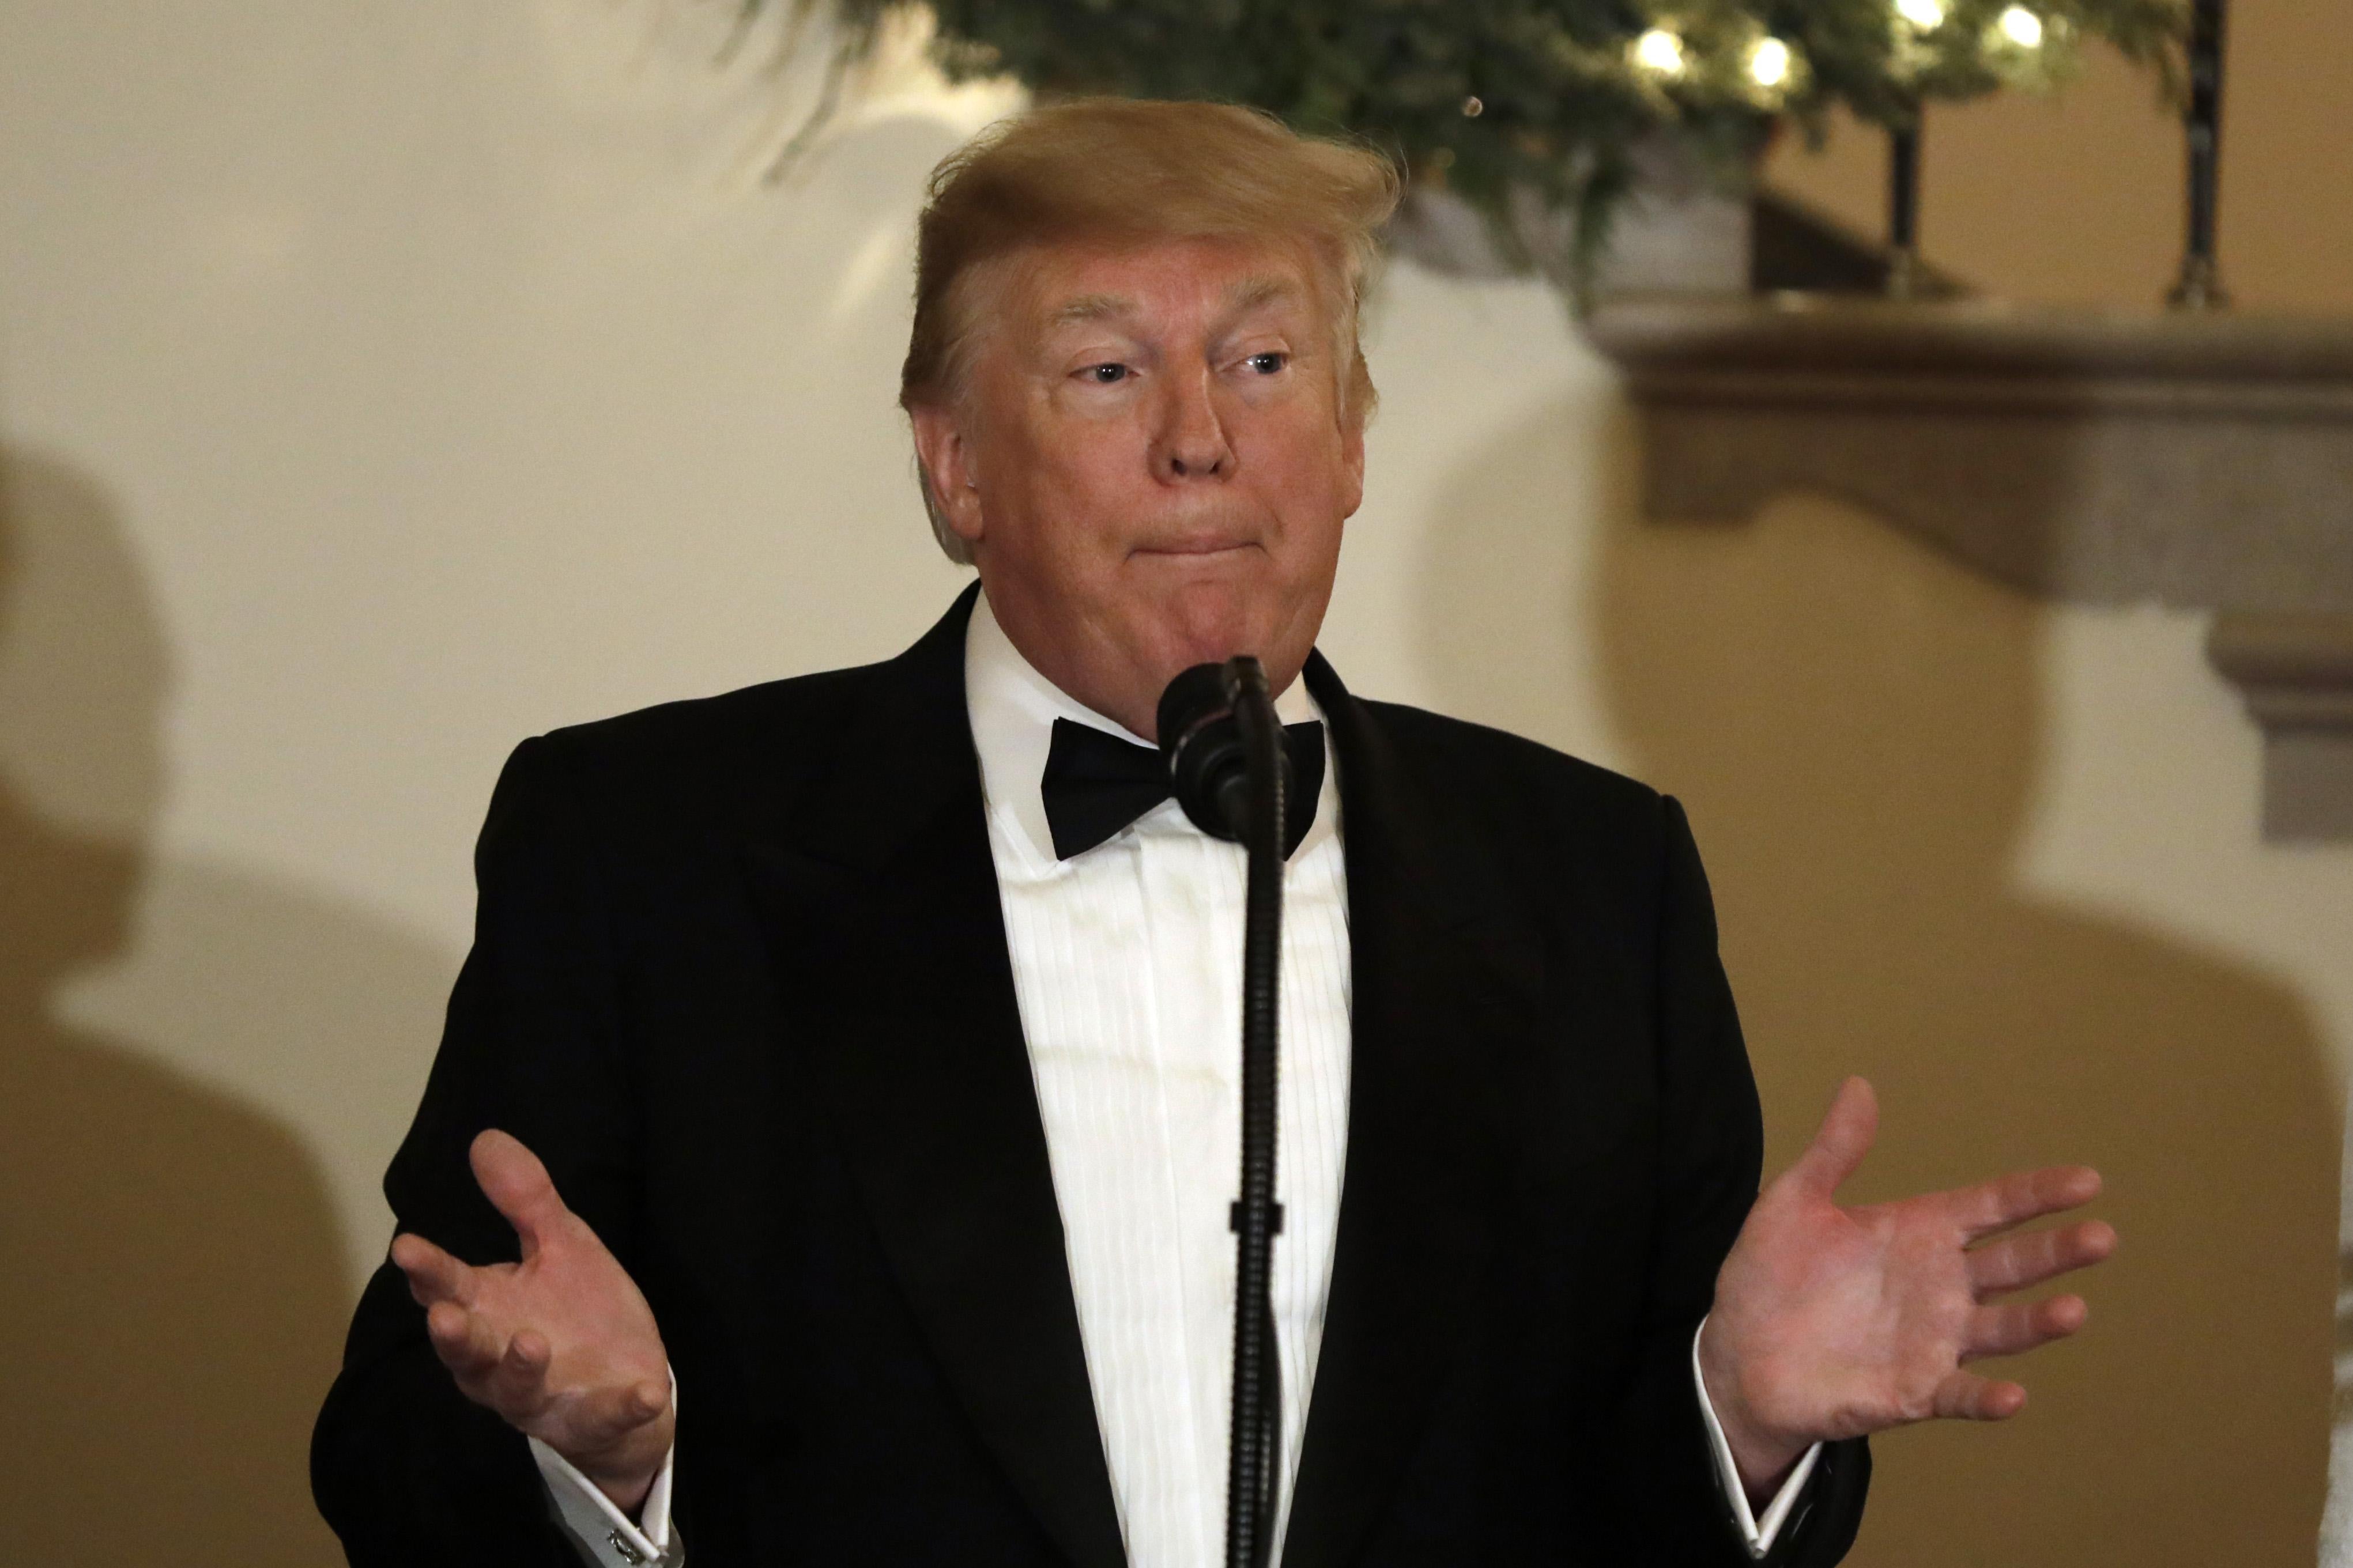 Trump in a tuxedo, speaking at a lectern 